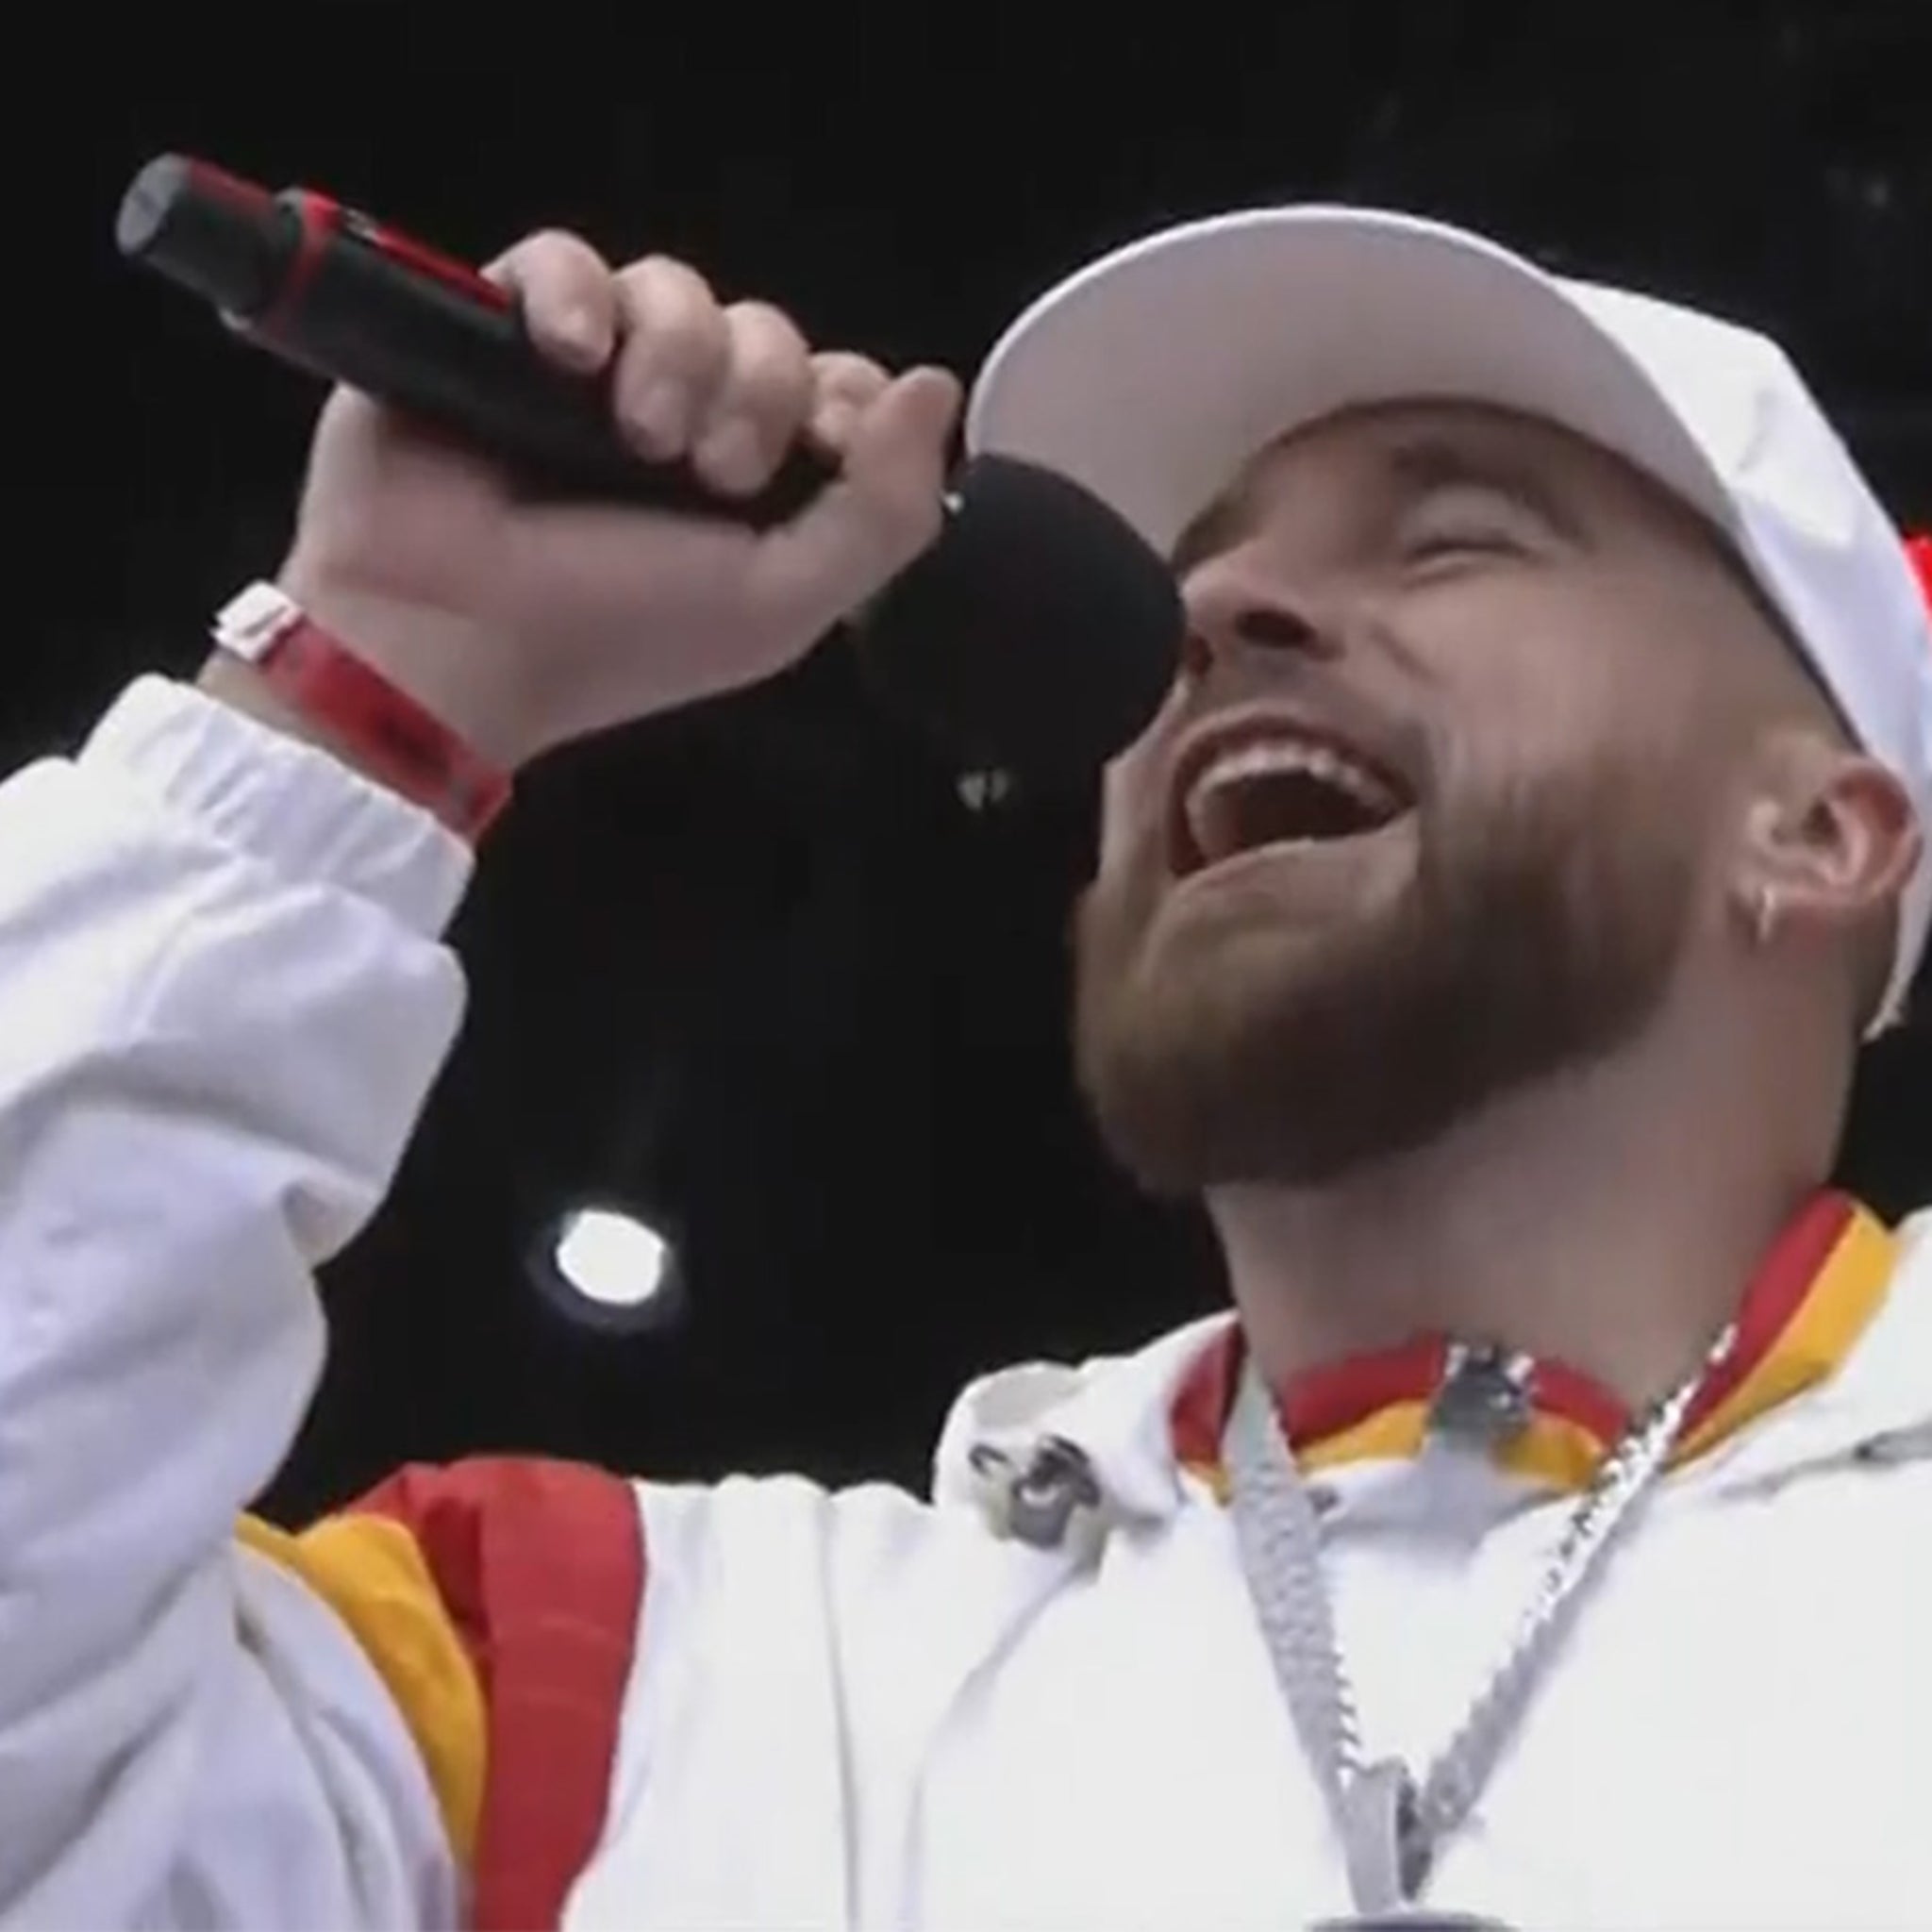 Chiefs Super Bowl parade: Travis Kelce fired up at haters in speech